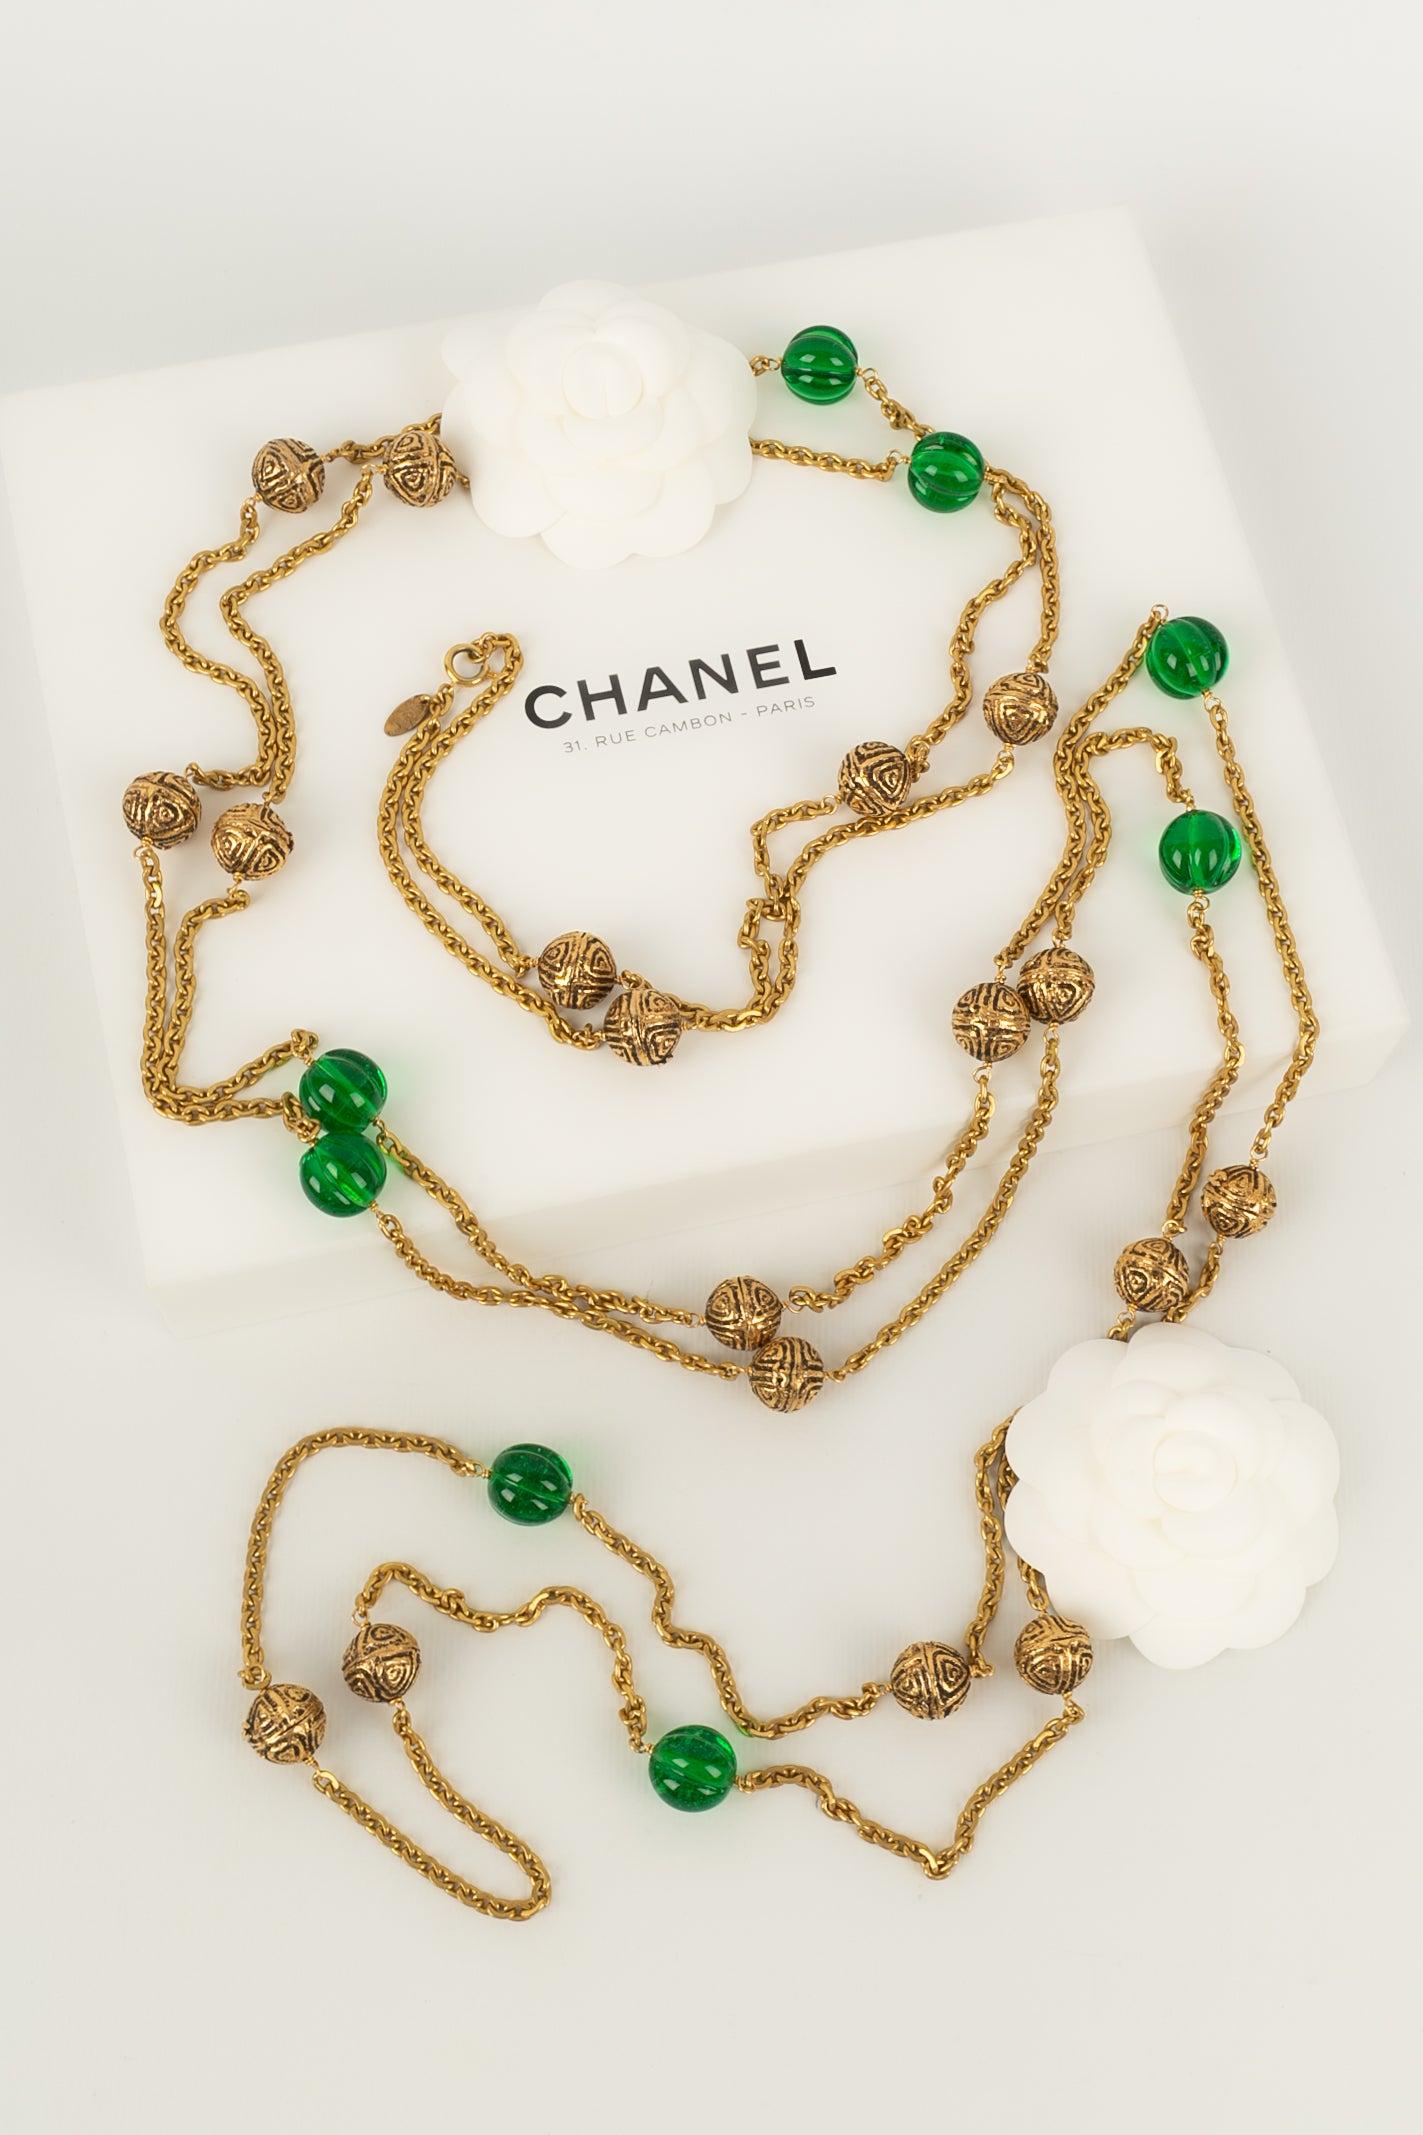 Chanel Long Necklace in Gold Metal and Glass Beads For Sale 6